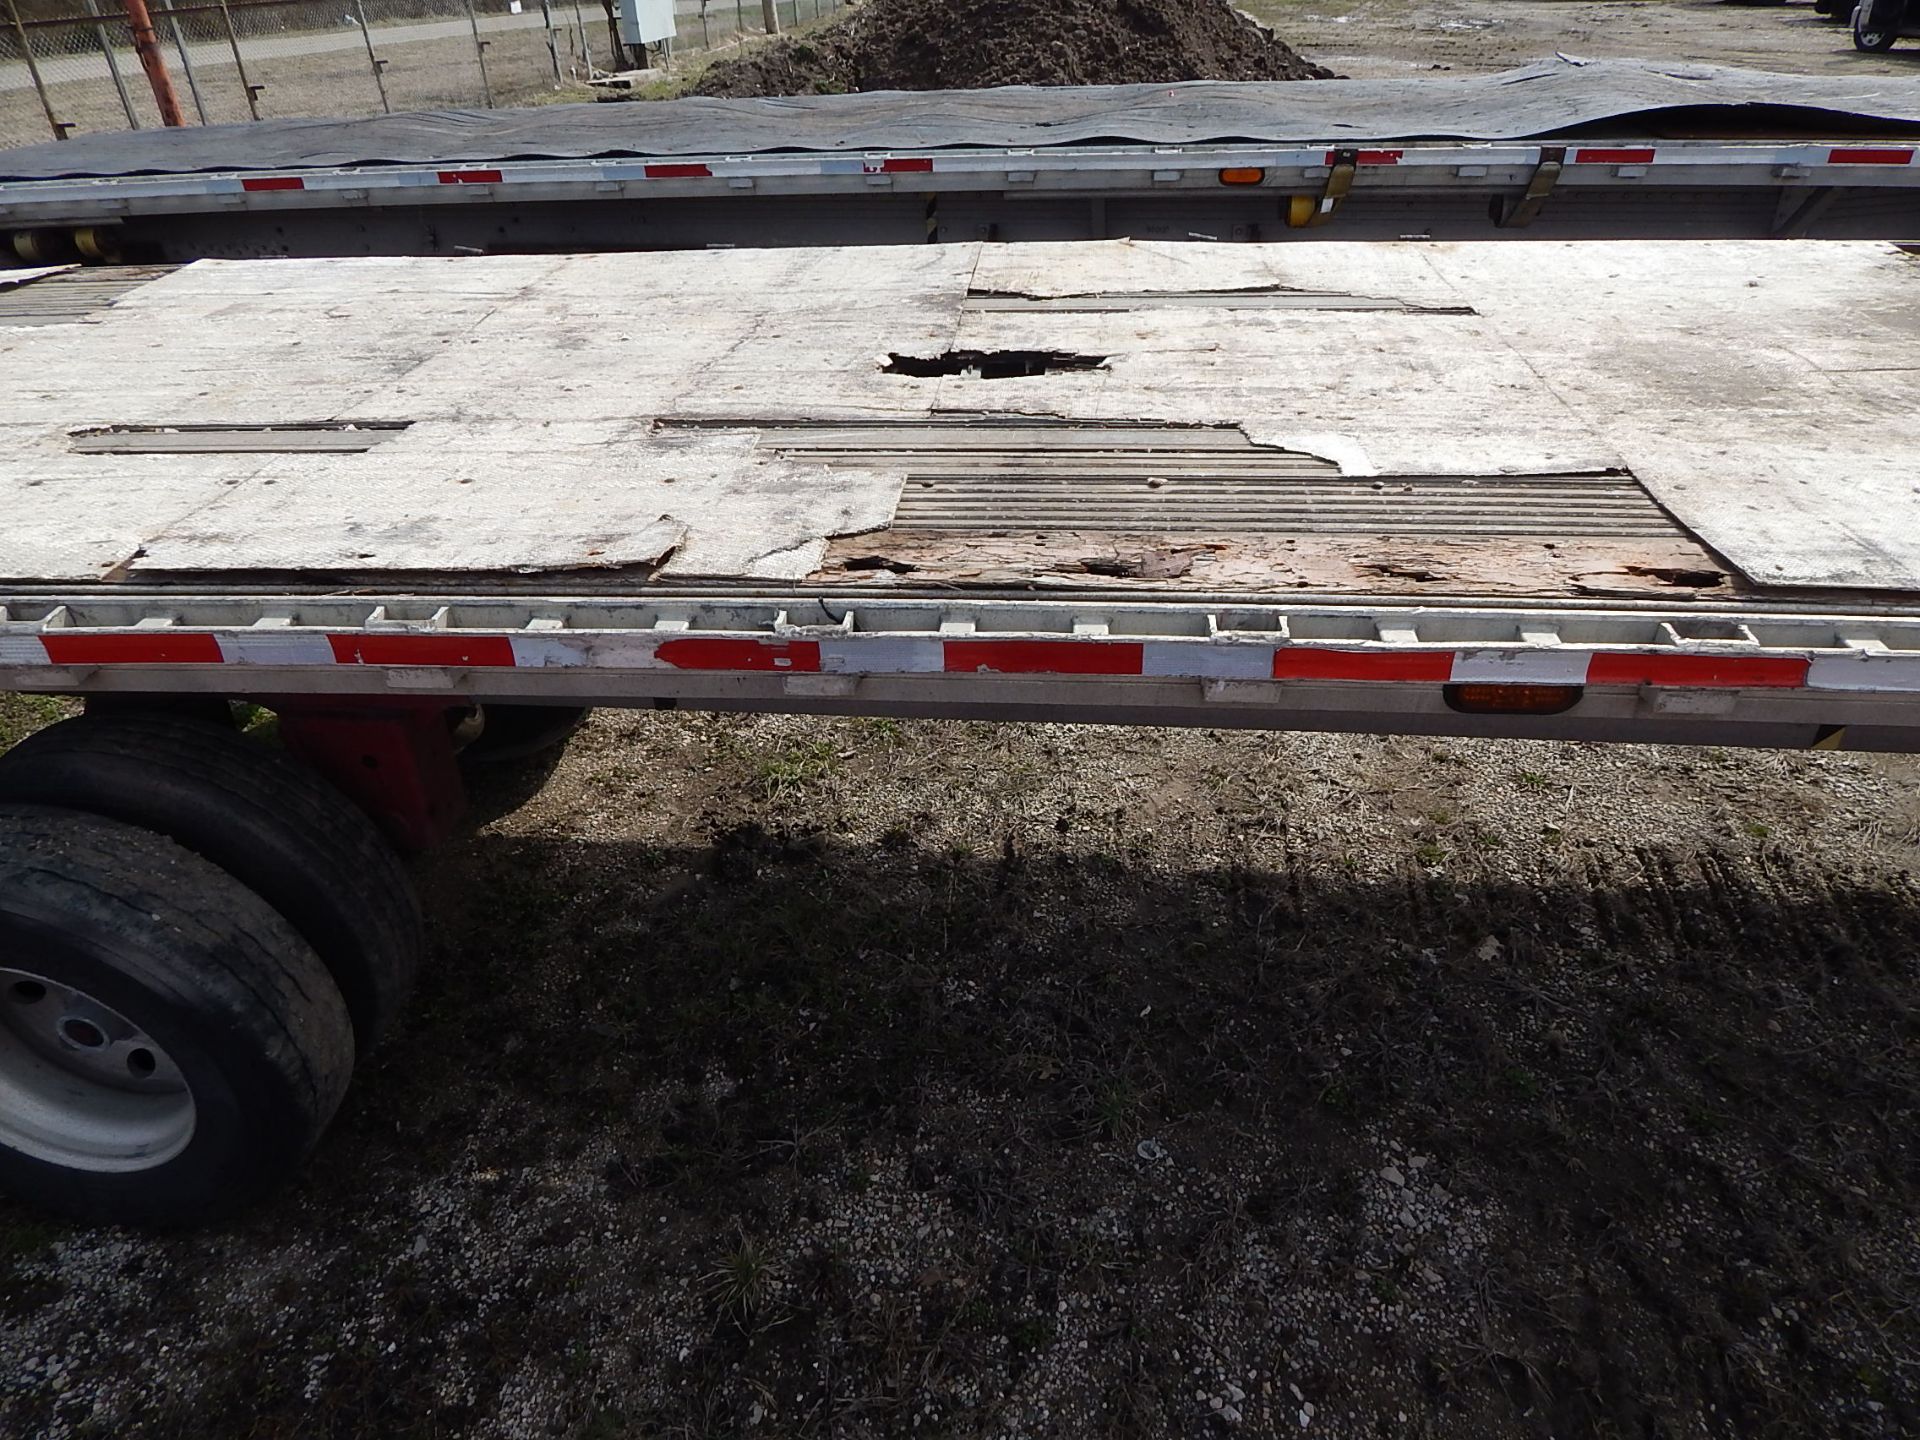 1996 Reitnouer Flat Bed Aluminum Semi Trailer, VIN: 1RNF48A27TR002404, 48 Ft., Tandem Spread Axle, - Image 4 of 13